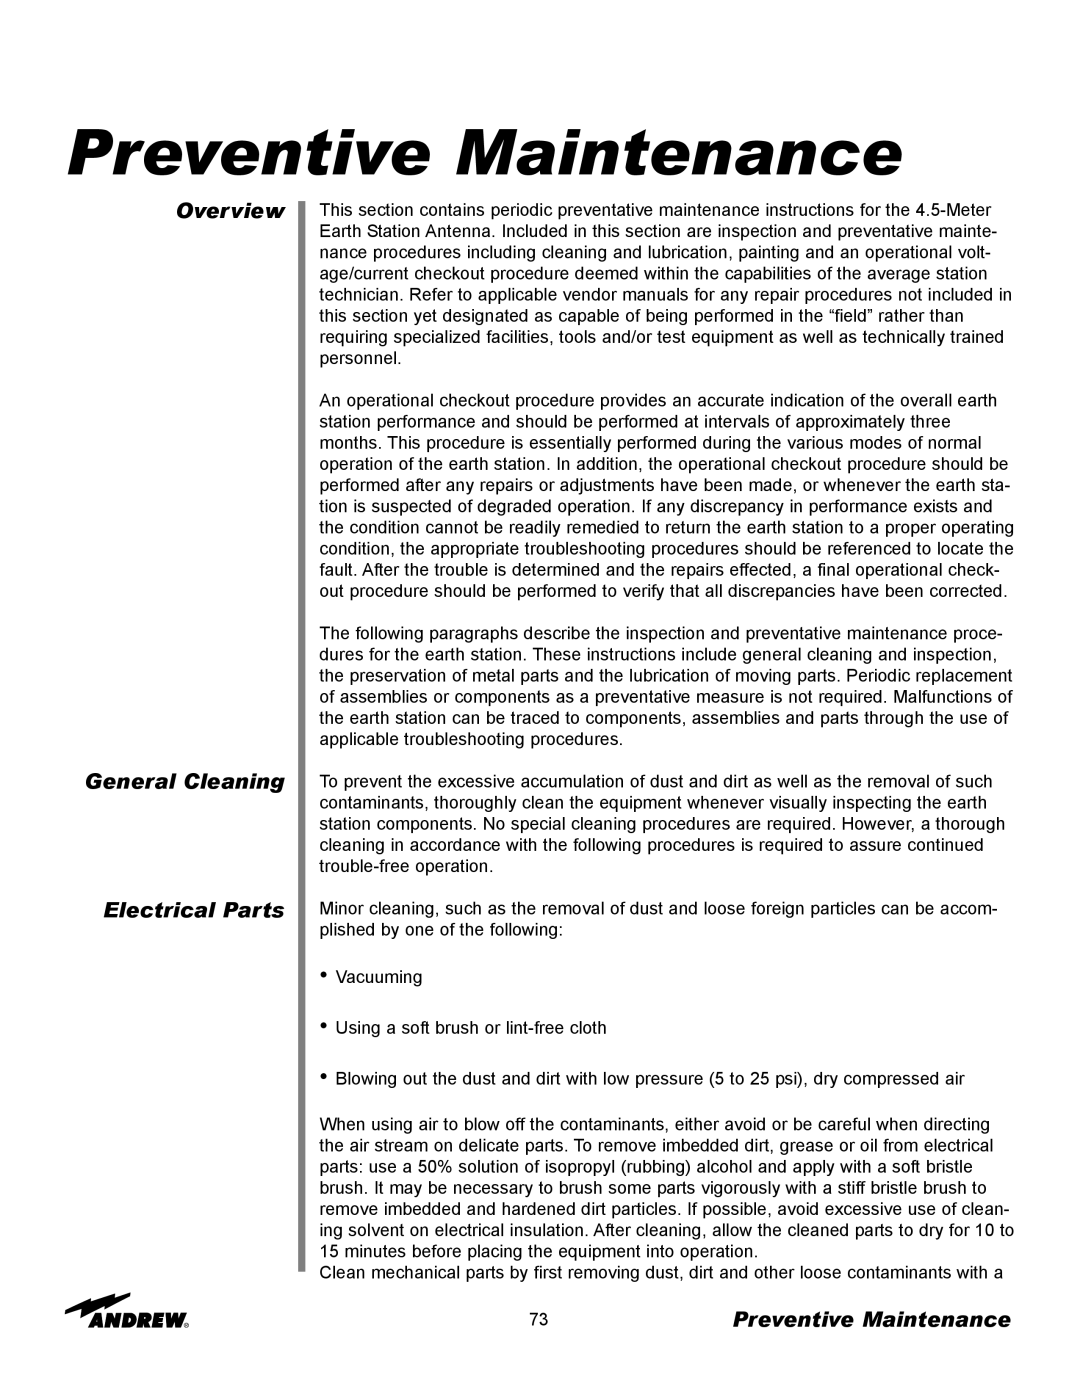 Andrew ES45T manual Preventive Maintenance, Overview General Cleaning Electrical Parts 